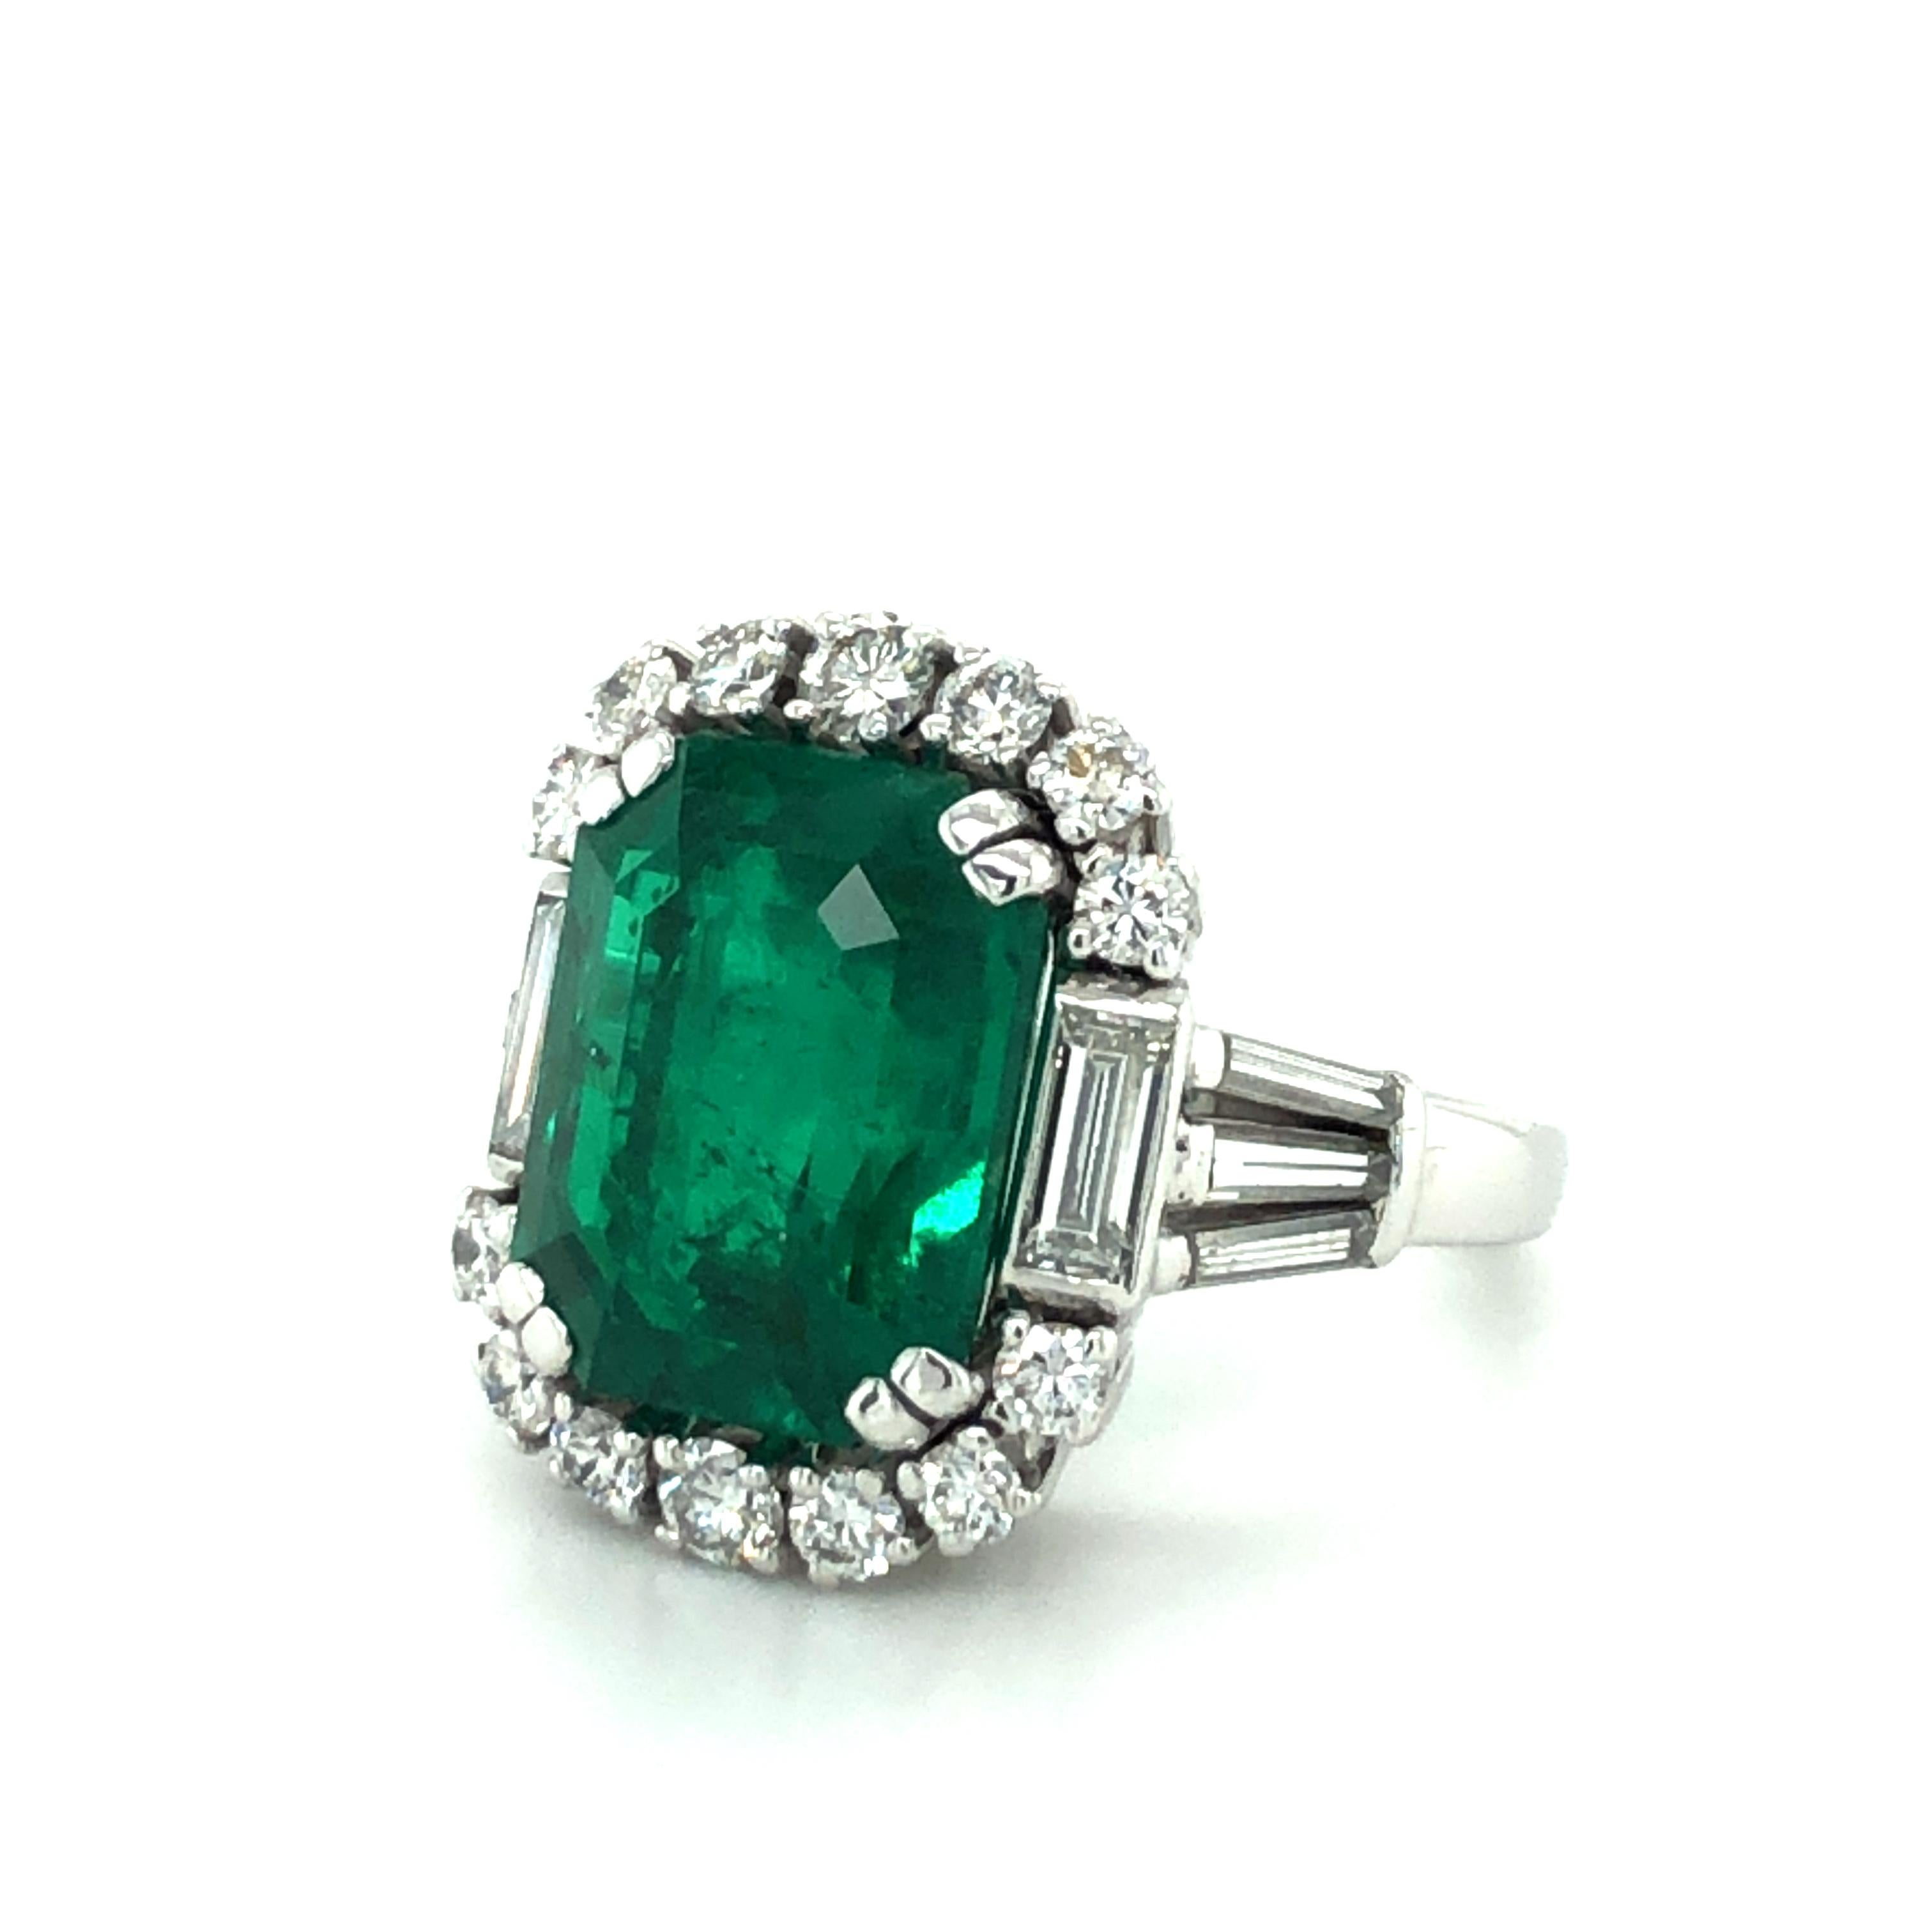 Contemporary 7.03 Carat Colombian Emerald and Diamond Ring in 18 Karat White Gold